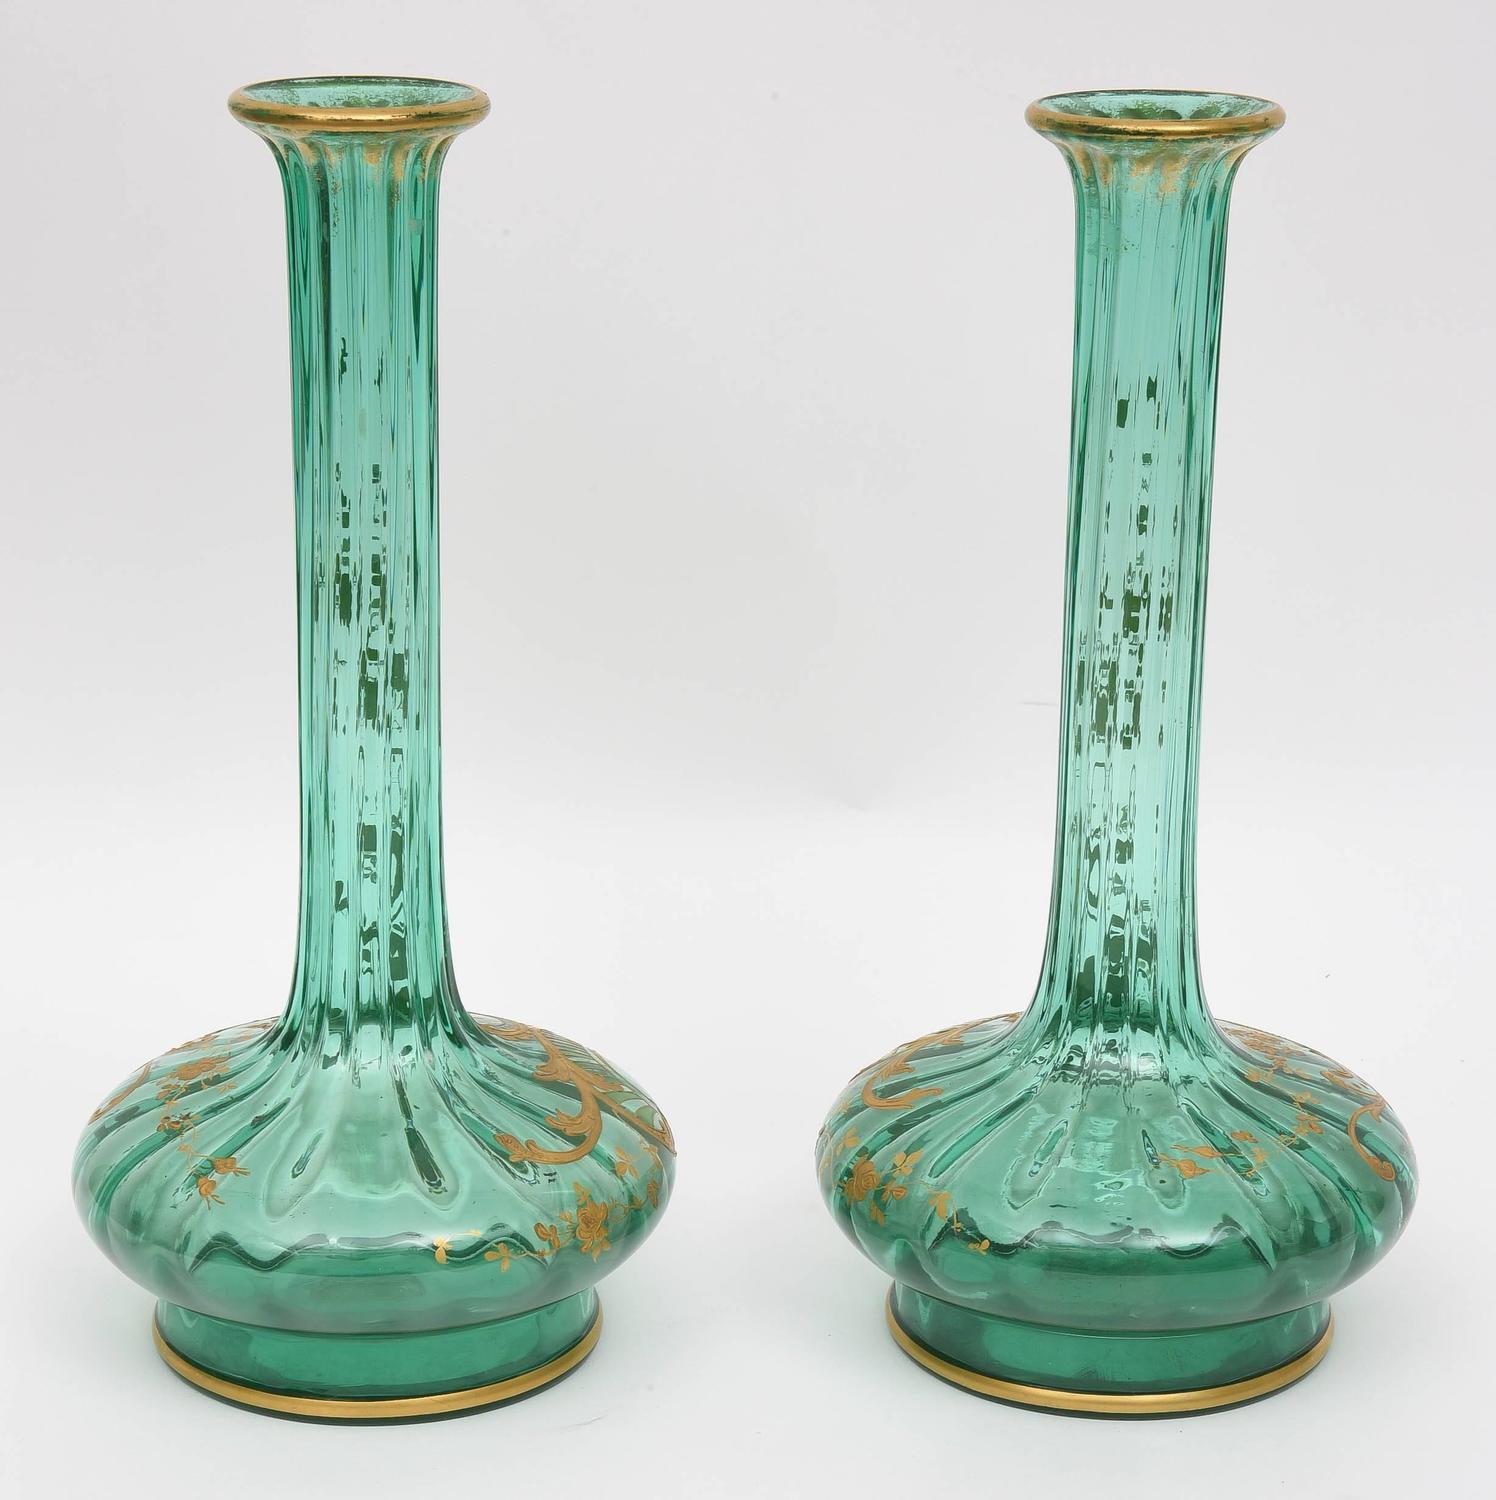 Pair Of 19th Century Moser Gilt Encrusted Green Glass Vases For Sale At 1stdibs